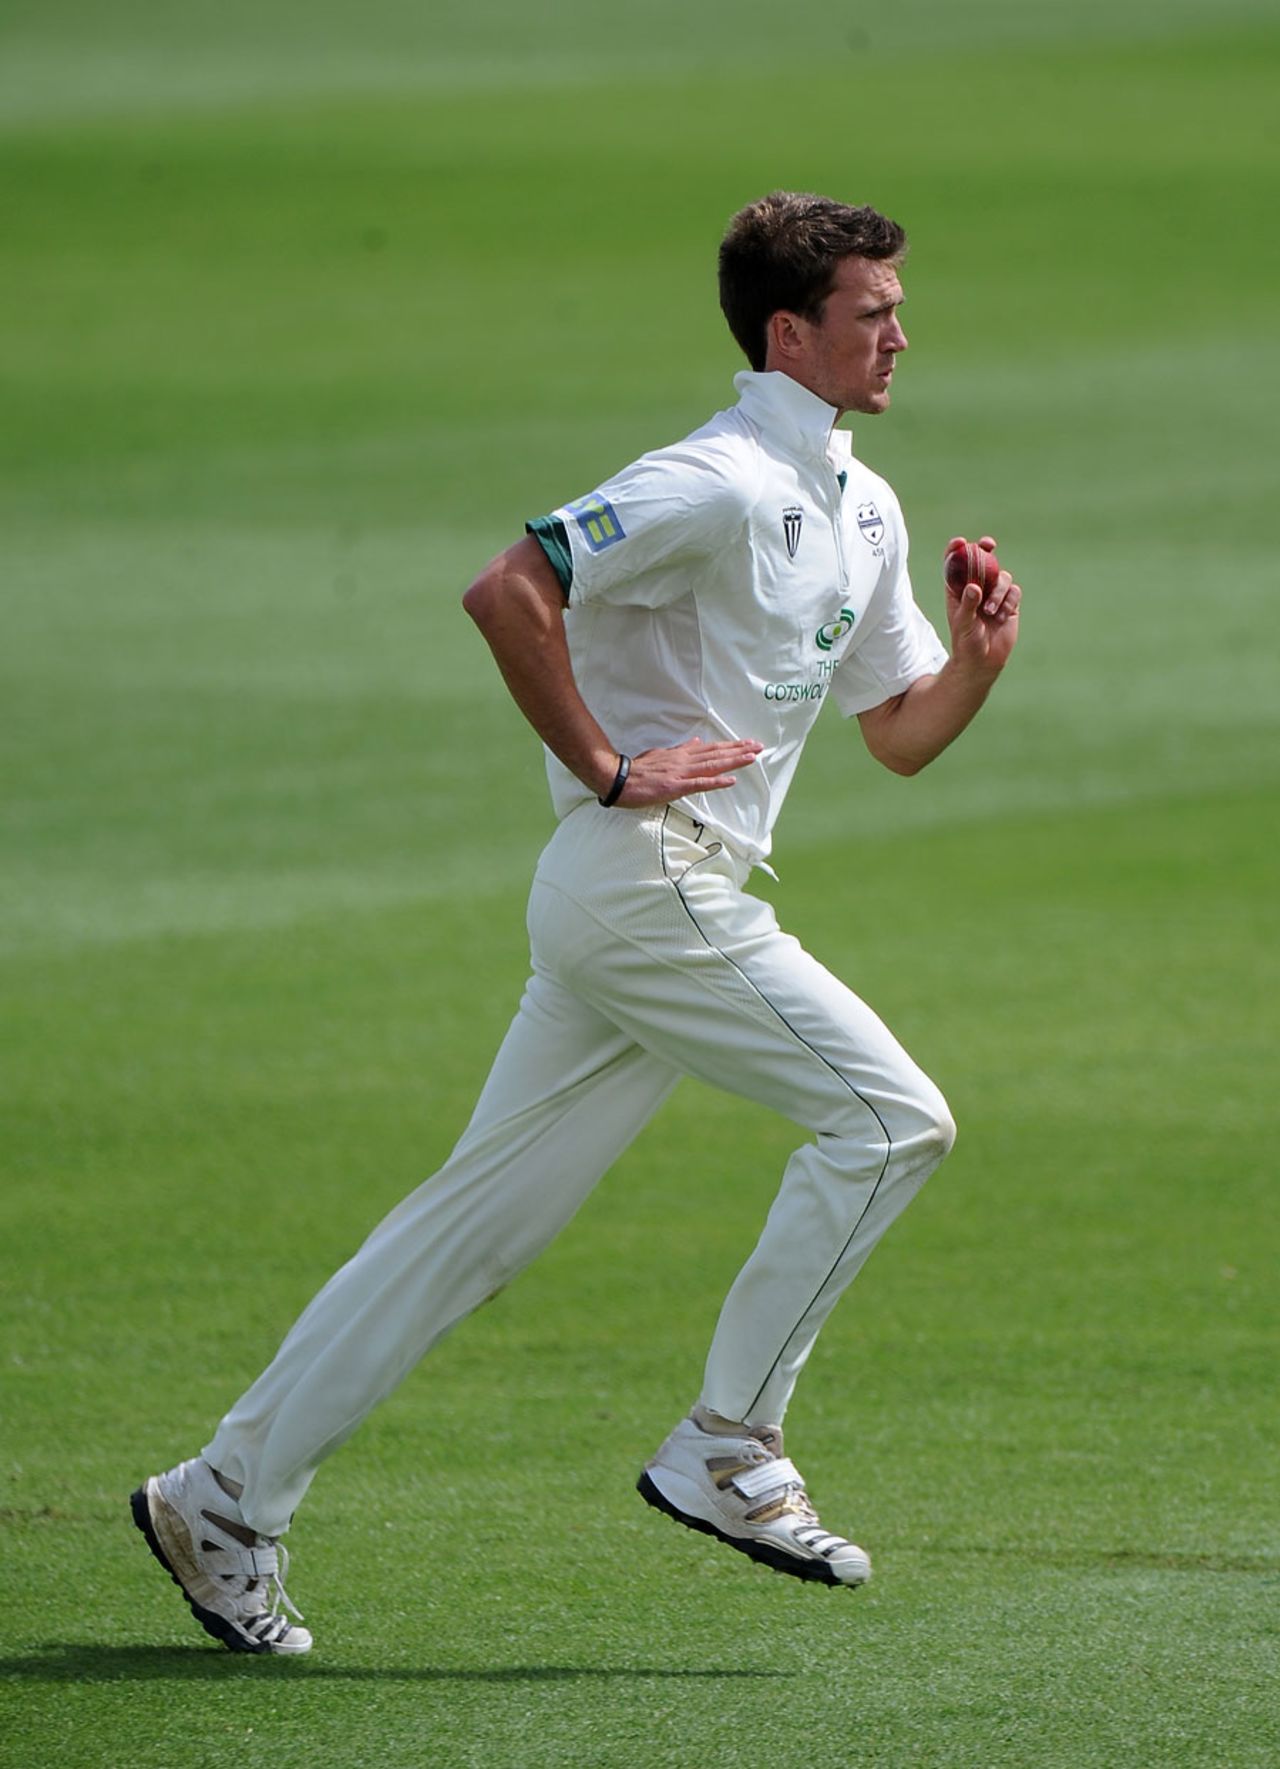 Jack Shantry runs in, Wwarwickshire v Worcestershire, County Championship, Division One, Edgbaston, 2nd day, May, 12, 2011